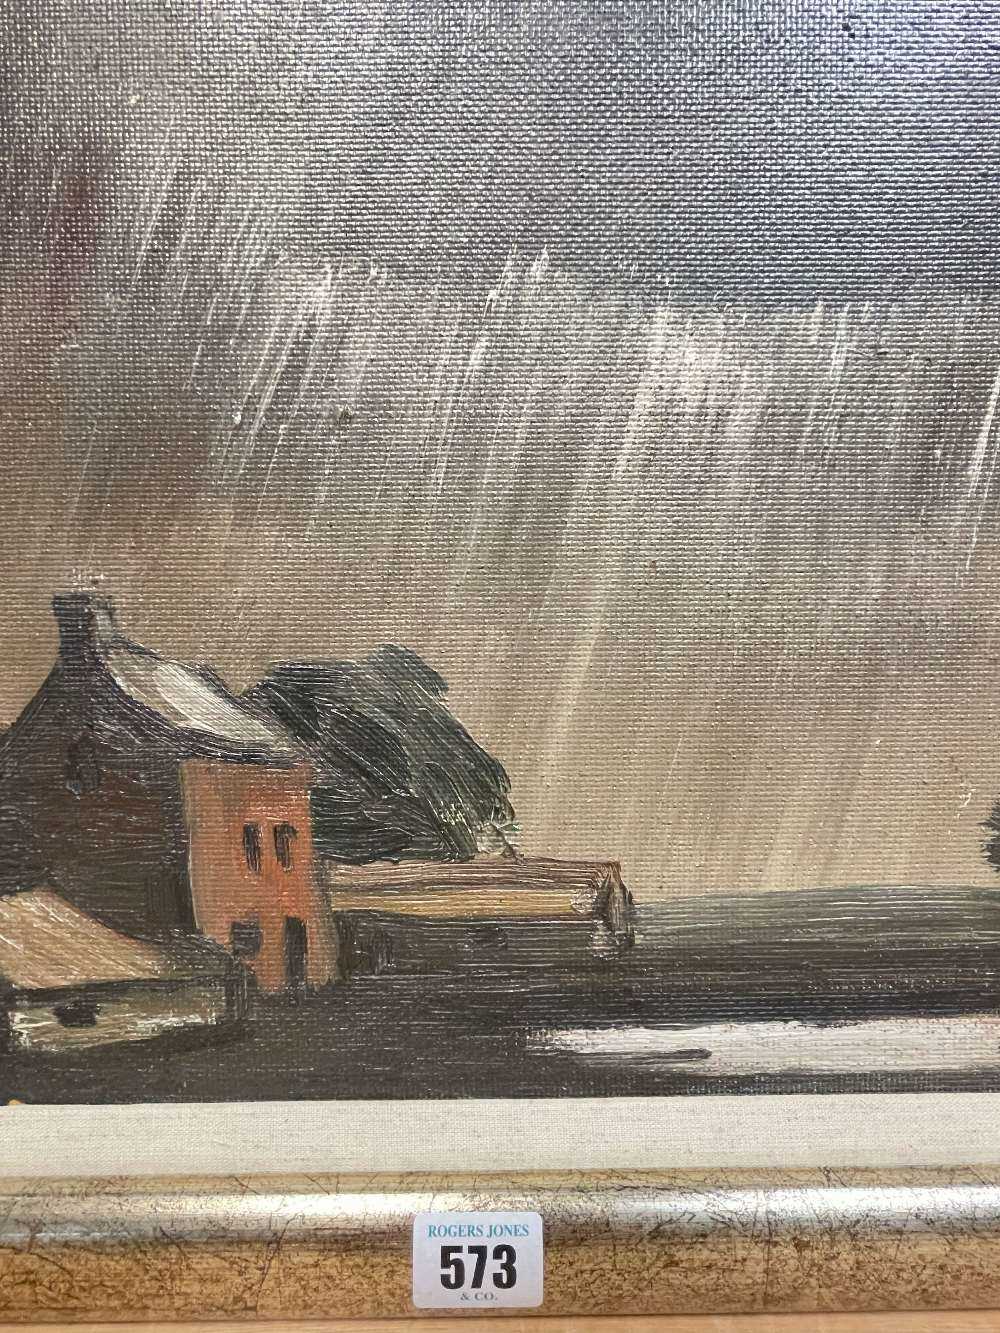 ‡ THEODORE MAJOR (1908-1999), oil on board - Storm at Farm, landscape with farm buildings and - Image 7 of 25